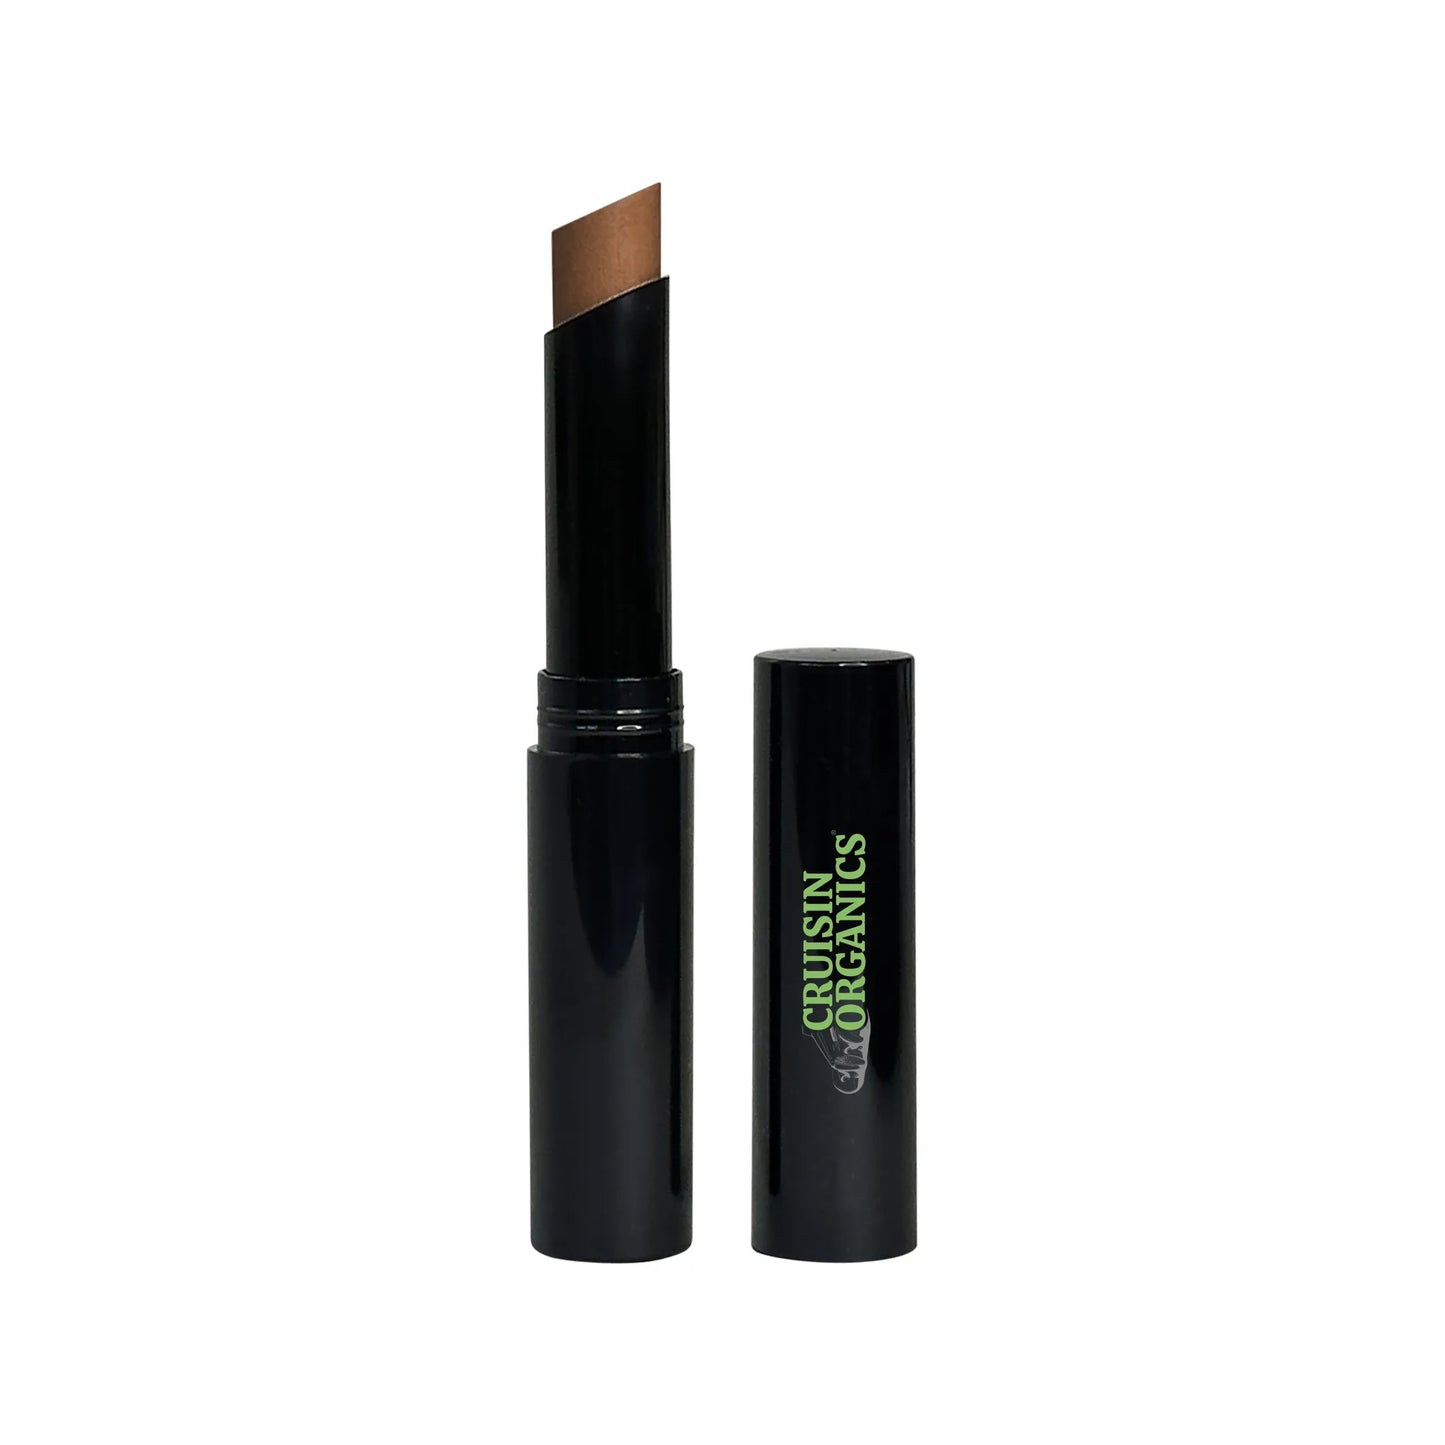 The Cruisin Organics Choco Creme Concealer Stick effectively conceals dark spots, providing high coverage and lasting results.